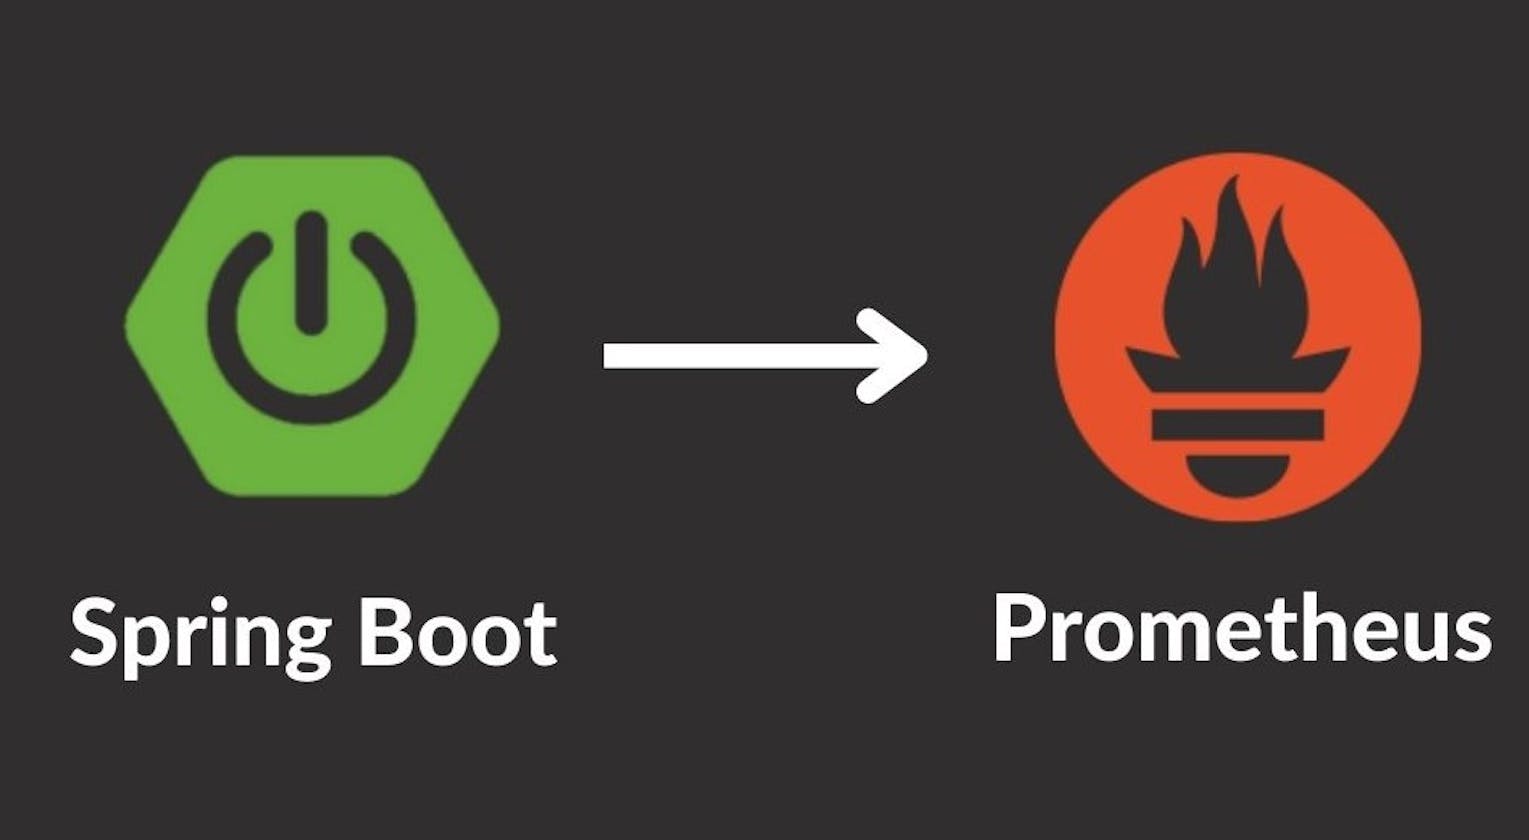 Secure your Spring Boot Actuator Endpoints and configure Prometheus with Basic Authentication